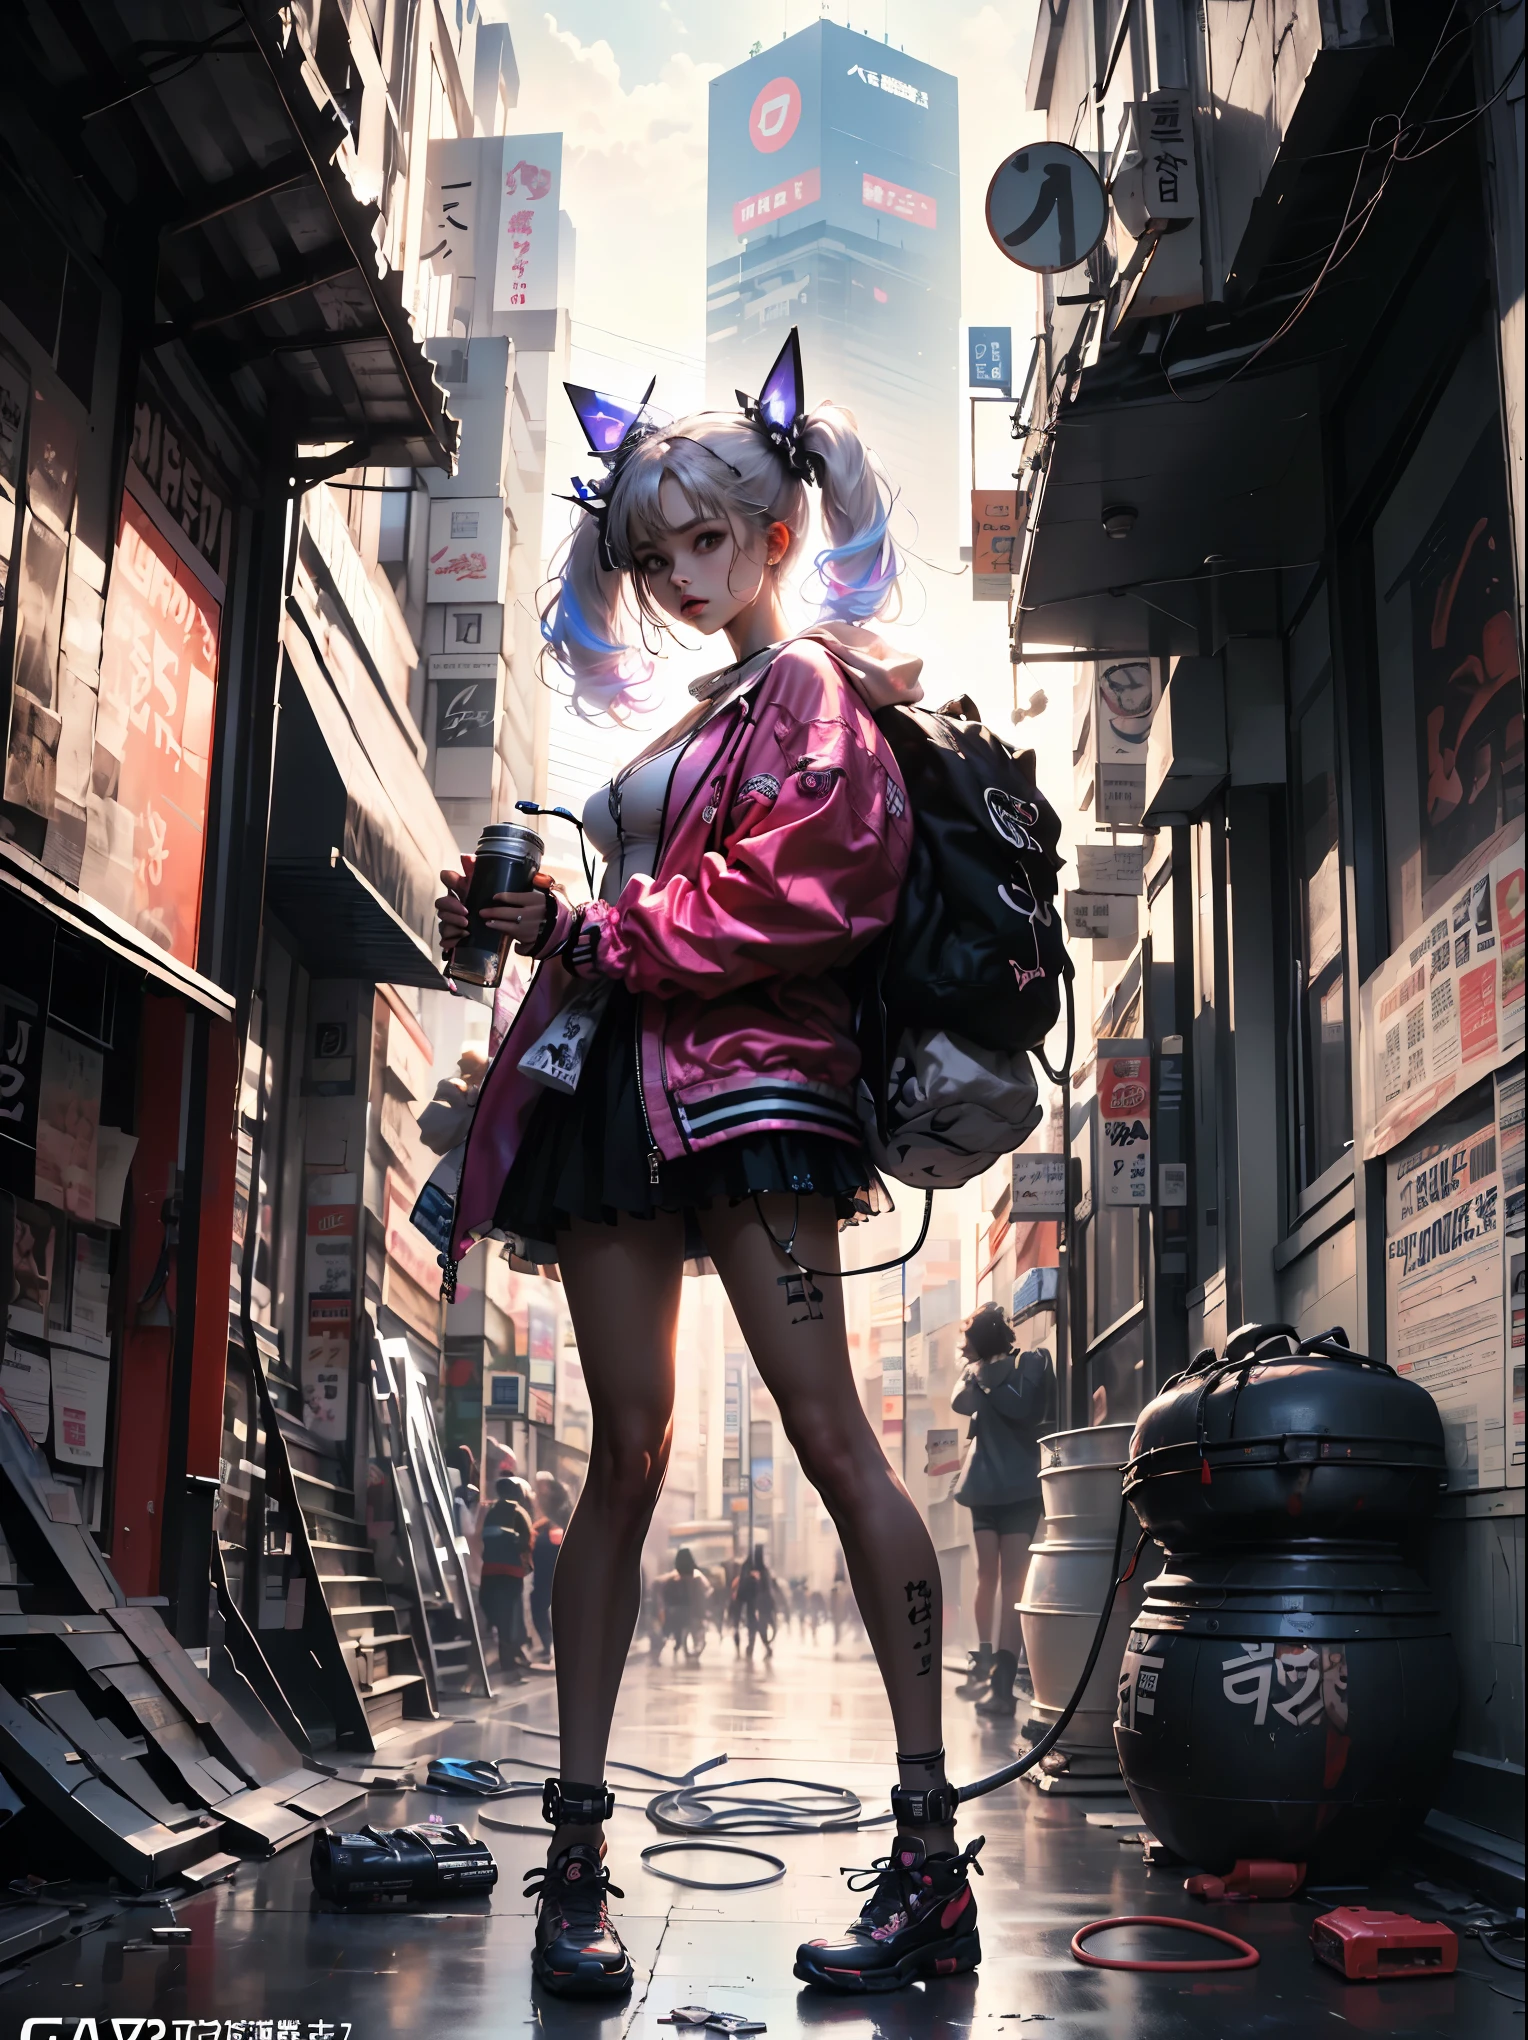 ((Stunning masterpiece anime illustration.)), ((Extremely delicate and beautiful cyber girl.)), ((Very detailed and exposed face)), ((mechanical member, )), (tube connections that join the neck:1.2), ((mass of wires and cables in the body)), ((wearing a colorful Harajuku technical jacket with logo)), (dynamic pose), ((futuristic motorcycle on left side)), ((at night sky with smog)),(Masterpiece), (((Best Quality))), ((ultra detailed)), (Highly detailed photorealistic CG illustration), cinematic lighting, Science fiction, extremely detailed,showy,more detail, (((cyberpunk city background, (Rewarded accommodation), harajuku district))), NSFW